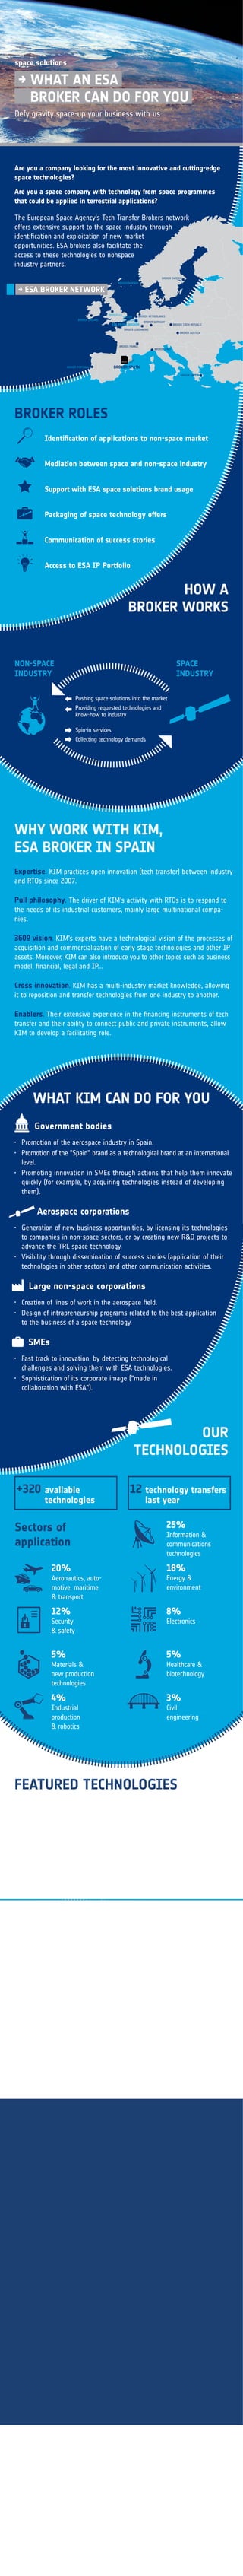 CONTACTS
Space-up your business with us!
Government bodies
•	 Promotion of the aerospace industry in Spain.
•	 Promotion of the "Spain" brand as a technological brand at an international
level.
•	 Promoting innovation in SMEs through actions that help them innovate
quickly (for example, by acquiring technologies instead of developing
them).
Aerospace corporations
•	 Generation of new business opportunities, by licensing its technologies
to companies in non-space sectors, or by creating new R&D projects to
advance the TRL space technology.
•	 Visibility through dissemination of success stories (application of their
technologies in other sectors) and other communication activities.
Large non-space corporations
•	 Creation of lines of work in the aerospace field.
•	 Design of intrapreneurship programs related to the best application		
to the business of a space technology.
SMEs
•	 Fast track to innovation, by detecting technological	 	 	 	 	
challenges and solving them with ESA technologies.
•	 Sophistication of its corporate image ("made in 		 	 	 	 	
collaboration with ESA").
→ WHAT AN ESA
BROKER CAN DO FOR YOU
space solutions
Defy gravity space-up your business with us
BROKER ROLES
WHY WORK WITH KIM,
ESA BROKER IN SPAIN
HOW A
BROKER WORKS
NON-SPACE
INDUSTRY
SPACE
INDUSTRY
Spin-in services
Collecting technology demands
Pushing space solutions into the market
Providing requested technologies and
know-how to industry
Are you a company looking for the most innovative and cutting-edge
space technologies?
Are you a space company with technology from space programmes
that could be applied in terrestrial applications?
The European Space Agency’s Tech Transfer Brokers network
offers extensive support to the space industry through
identification and exploitation of new market
opportunities. ESA brokers also facilitate the
access to these technologies to nonspace
industry partners.
Mediation between space and non-space industry
Support with ESA space solutions brand usage
Identification of applications to non-space market
Communication of success stories
Packaging of space technology offers
Access to ESA IP Portfolio
Expertise. KIM practices open innovation (tech transfer) between industry
and RTOs since 2007.
Pull philosophy. The driver of KIM’s activity with RTOs is to respond to
the needs of its industrial customers, mainly large multinational compa-
nies.
360º vision. KIM’s experts have a technological vision of the processes of
acquisition and commercialization of early stage technologies and other IP
assets. Moreover, KIM can also introduce you to other topics such as business
model, financial, legal and IP...
Cross innovation. KIM has a multi-industry market knowledge, allowing
it to reposition and transfer technologies from one industry to another.
Enablers. Their extensive experience in the financing instruments of tech
transfer and their ability to connect public and private instruments, allow
KIM to develop a facilitating role.
WHAT KIM CAN DO FOR YOU
OUR
TECHNOLOGIES
25%
Information &
communications
technologies
4%
Industrial
production
& robotics
18%
Energy &
environment
20%
Aeronautics, auto-
motive, maritime
& transport
5%
Healthcare &
biotechnology
5%
Materials &
new production
technologies
8%
Electronics
12%
Security
& safety
3%
Civil
engineering
Sectors of
application
+320 	avaliable
		technologies
12 technology transfers
last year
BROKER SPAIN
ESA BROKER NETWORK
FEATURED TECHNOLOGIES
FROM SPACE TO NON-SPACE
MARKET: SUCCESS STORIES
ESA PRIME BROKER
BROKER PORTUGAL
BROKER IRELAND
BROKER U.K.
BROKER
BELGIUM
BROKER LUXEMBURG
BROKER FRANCE
BROKER NORWAY
BROKER SWEDEN
BROKER NETHERLANDS
BROKER GERMANY
BROKER CZECH REPUBLIC
BROKER AUSTRIA
BROKER ITALY
BROKER GREECE
Images courtesy of ESA.
Designed by KIM.
KIM is founding member of
The Knowledge Agents Alliance
→ Mamagoose, the baby pyjamas
that help prevent and understand
SIDS
Mamagoose pyjamas have built-in sensors
and an electronic monitoring unit to detect
Sudden Infant Death Syndrome (SIDS).
These pyjamas draw on technology used
in two space applications: the analogue
biomechanics recorder experiment and the
respiratory inductive plethysmograph suit.
→ Roboclimber, the space robot
that help to prevent landslides
One of the largest robots ever
constructed will also be one of
the most agile, thanks to
technology derived from ESA
space missions. Known as
Roboclimber, this new
climbing machine is
designed to prevent
landslides without
endangering
human lives.
→ Advanced fluidic filter (PAT 642)
Multi-layer mesh filter for fluids with an
improved structure that maximizes the
surface and prevents particle build up.
→ Exoskeleton for the human arm, for
materials handling (PAT 474)
Kinematical structure fixed on the chest of
the operator. Large range of movements
and lightweight. Opportunities in the field
of assembling or manipulating machinery
that require remotely controlled arms.
→ Mechanical support ring structure
(PAT 596)
It uses two pantographs deploying		
separately in a cylinder or cone, providing
improvements in stability and stiffness
when deployed, as well as	reliability 	
during deployment.
→ Andrea Marí
Project Manager of ESA Broker Spain Project
amari@kimglobal.com
+34 912 905 827
kimglobal.com
 